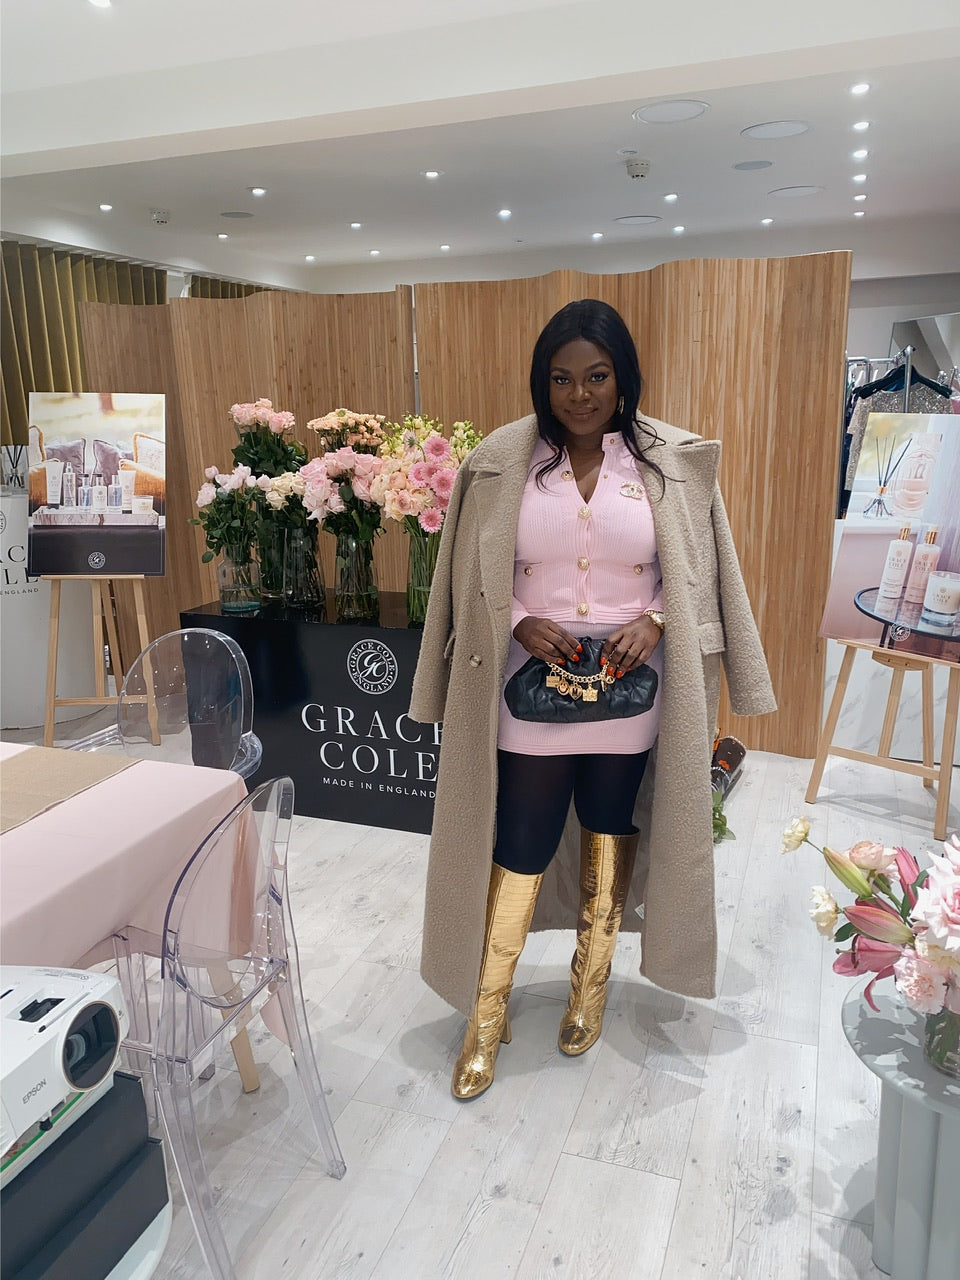 Ivy Attends Mother’s Day Event With Grace Cole And Pollenet Flowers